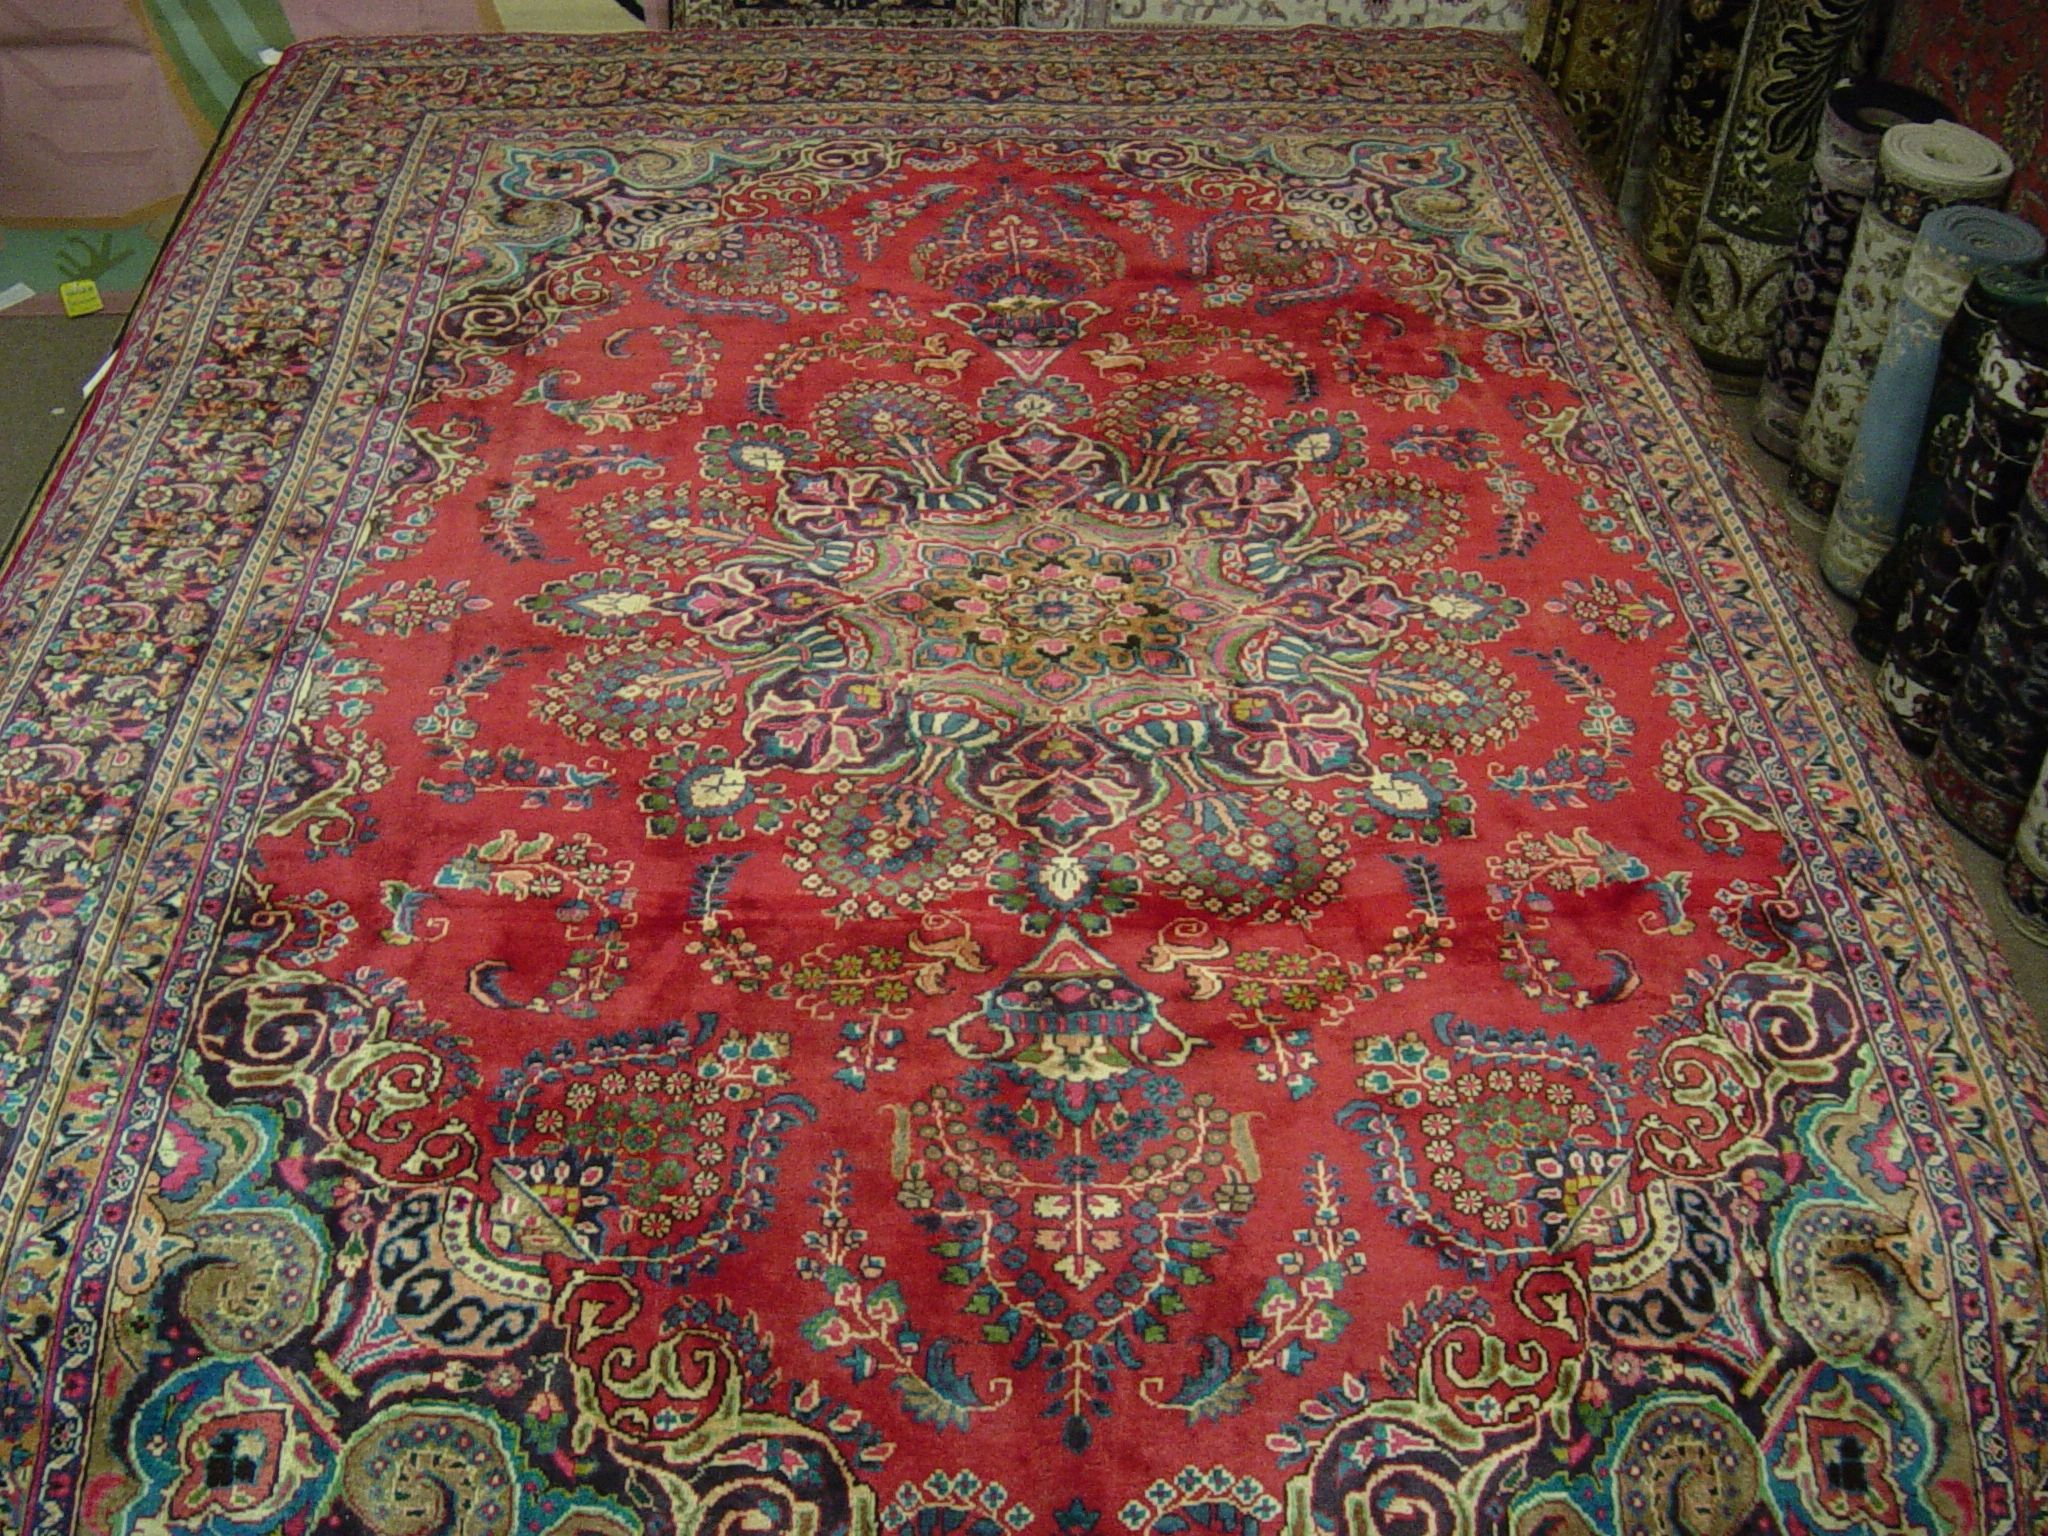 Rugs and Carpets - Best Value Rugs and Carpet